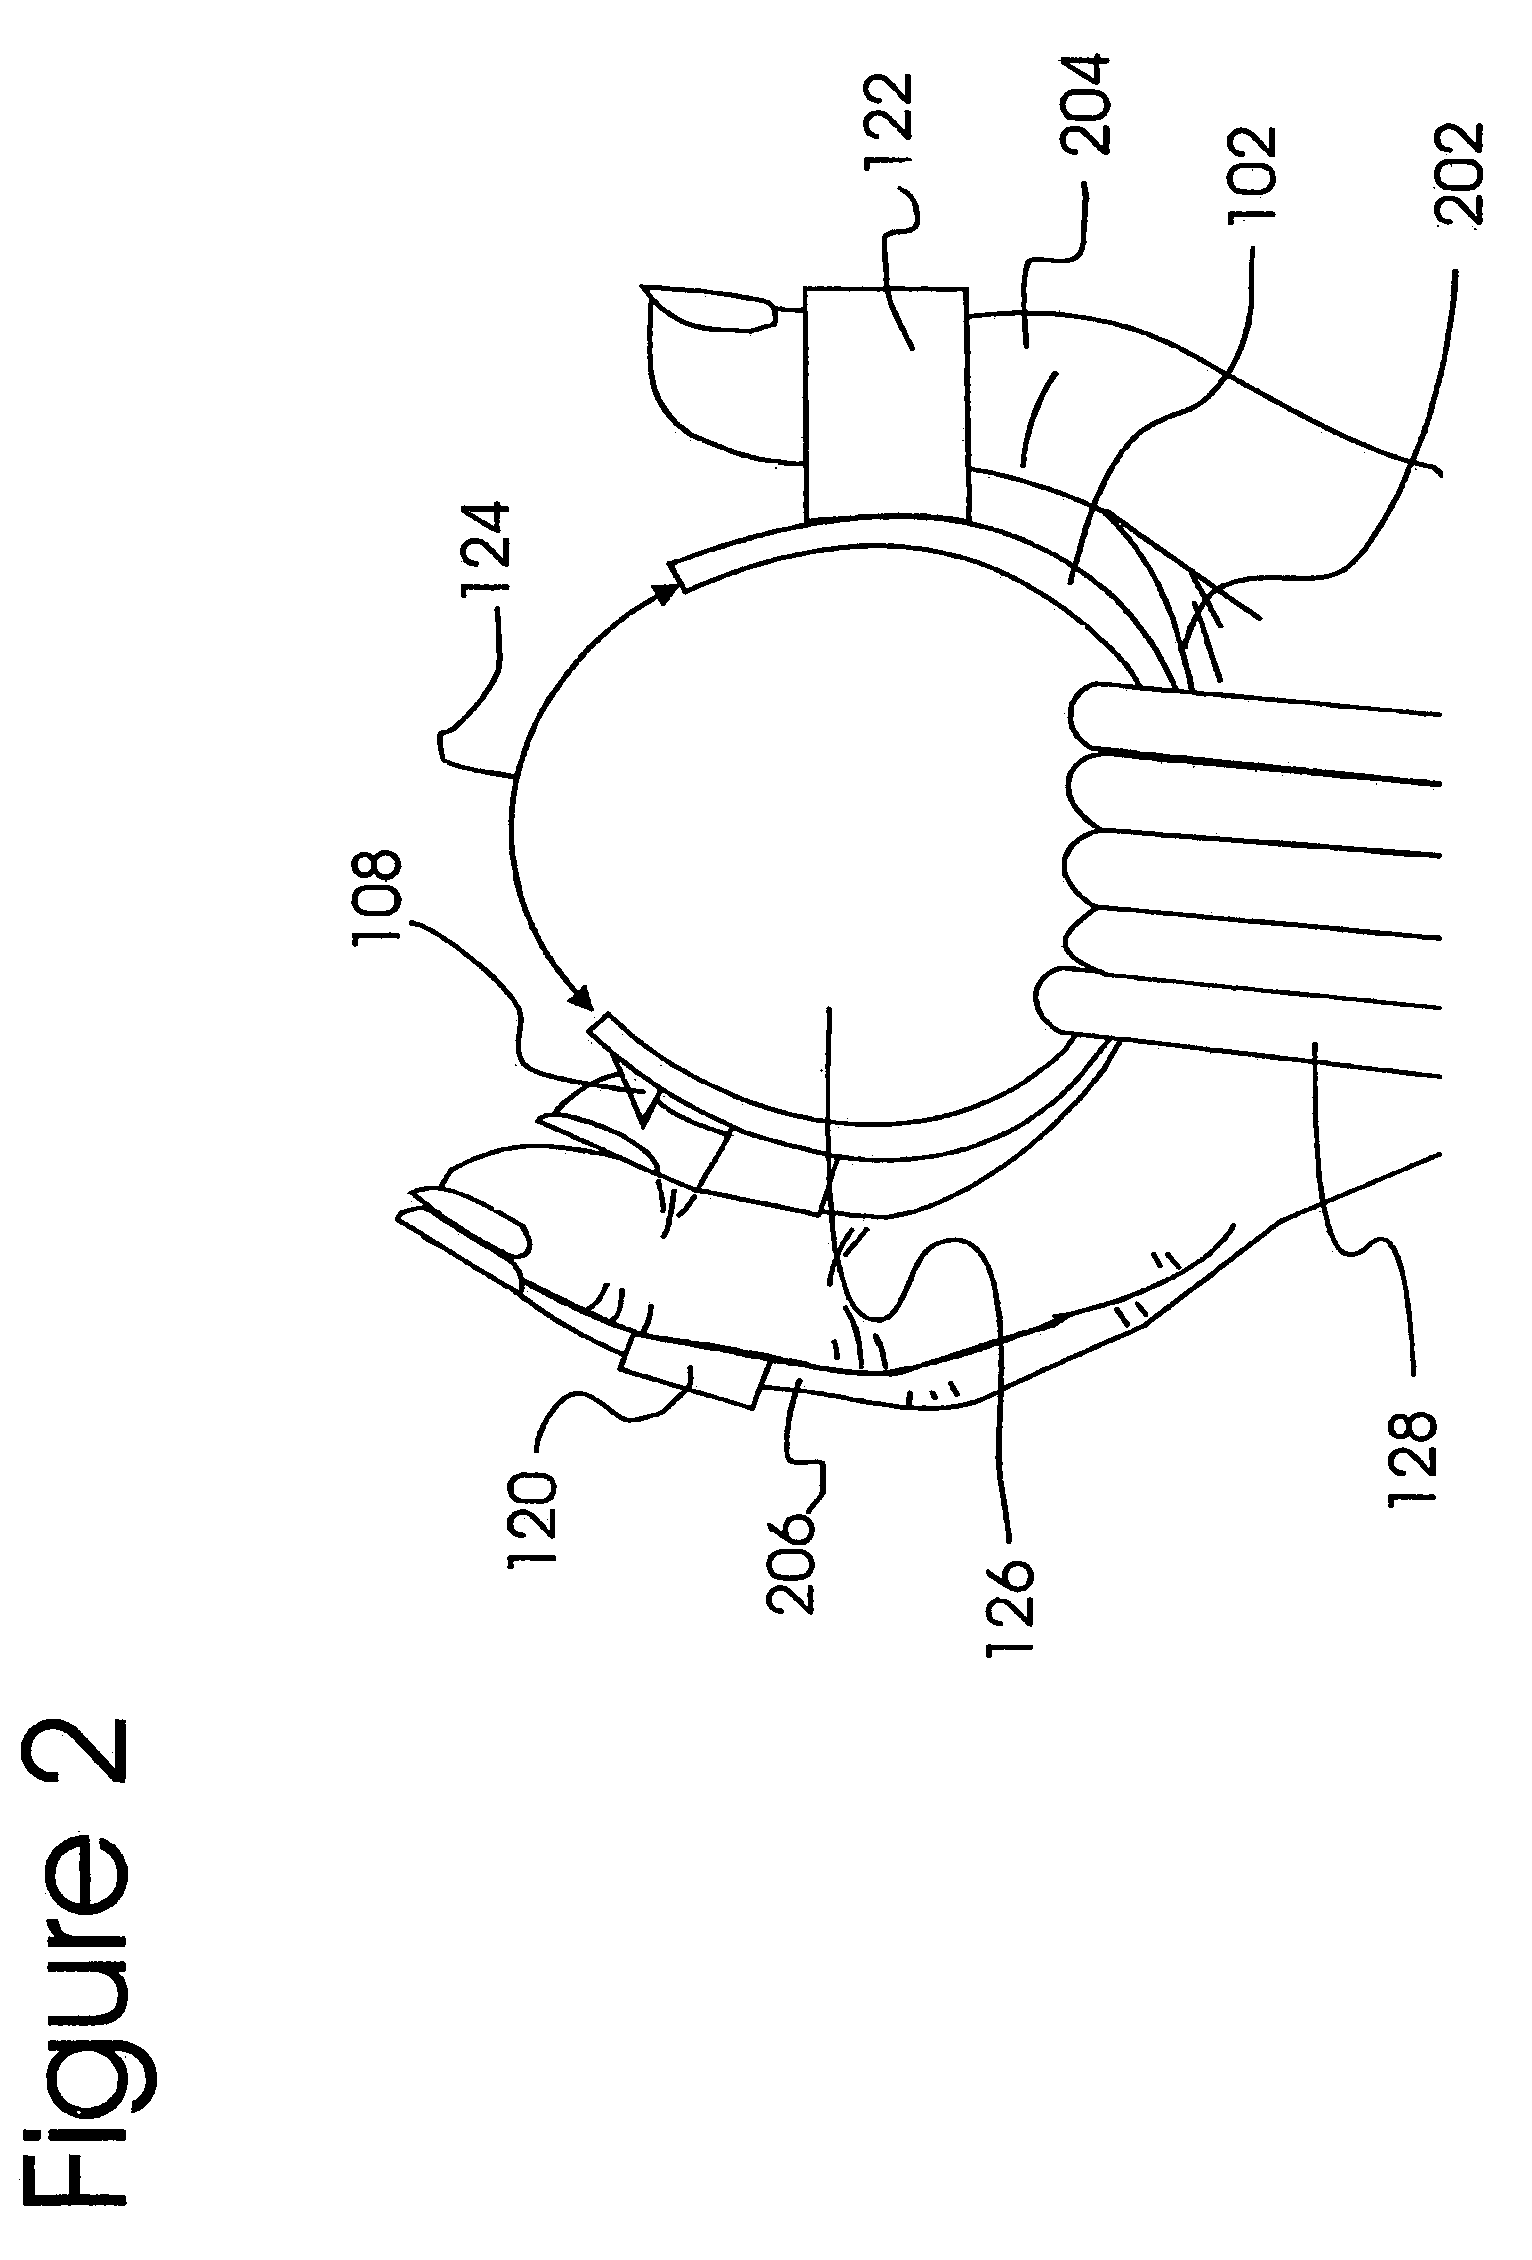 Single-handed cord/cable management device